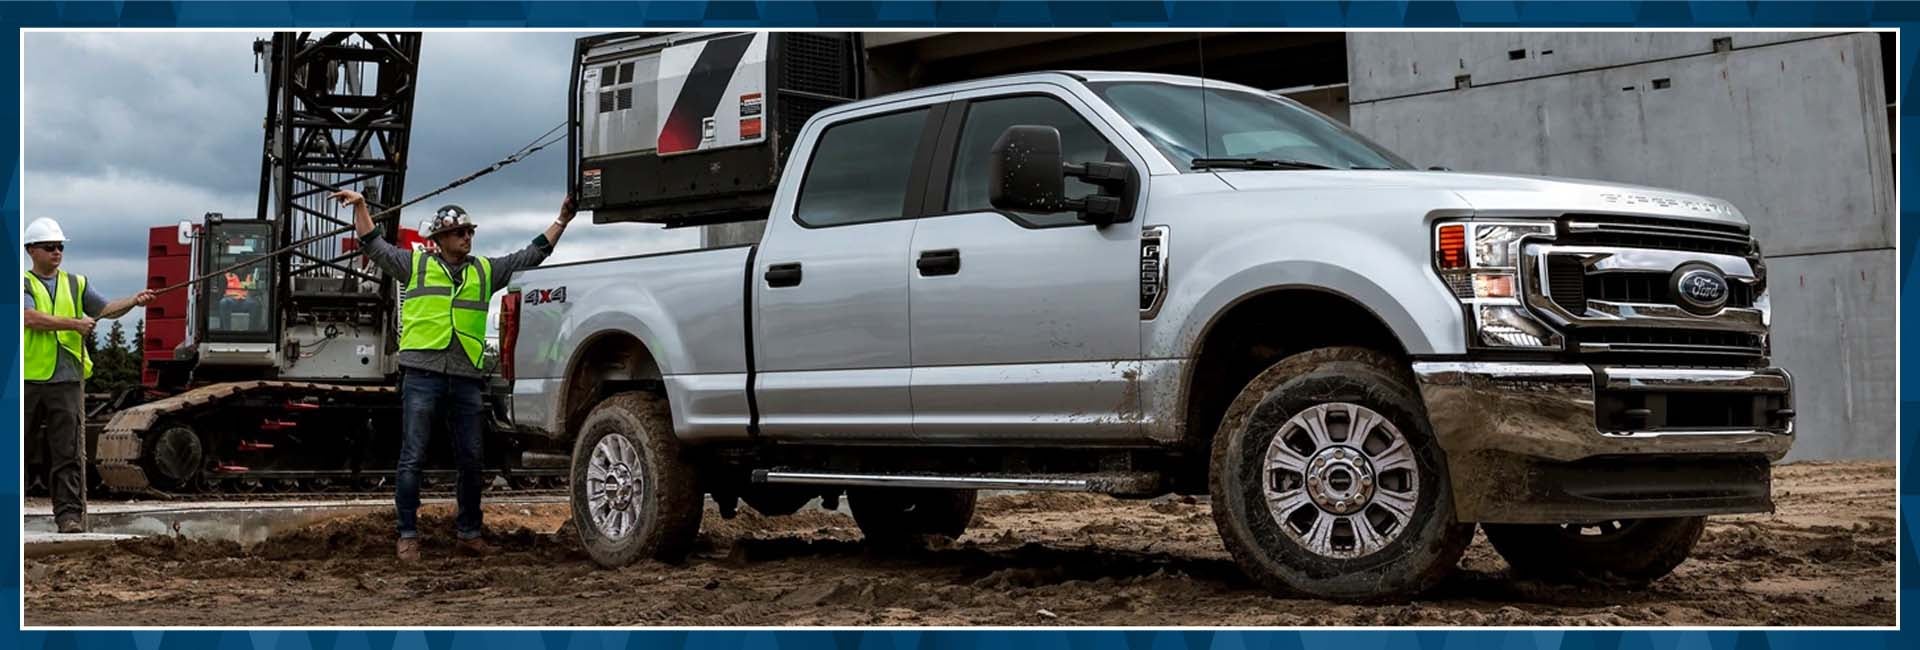 2021 Ford Super Duty specs